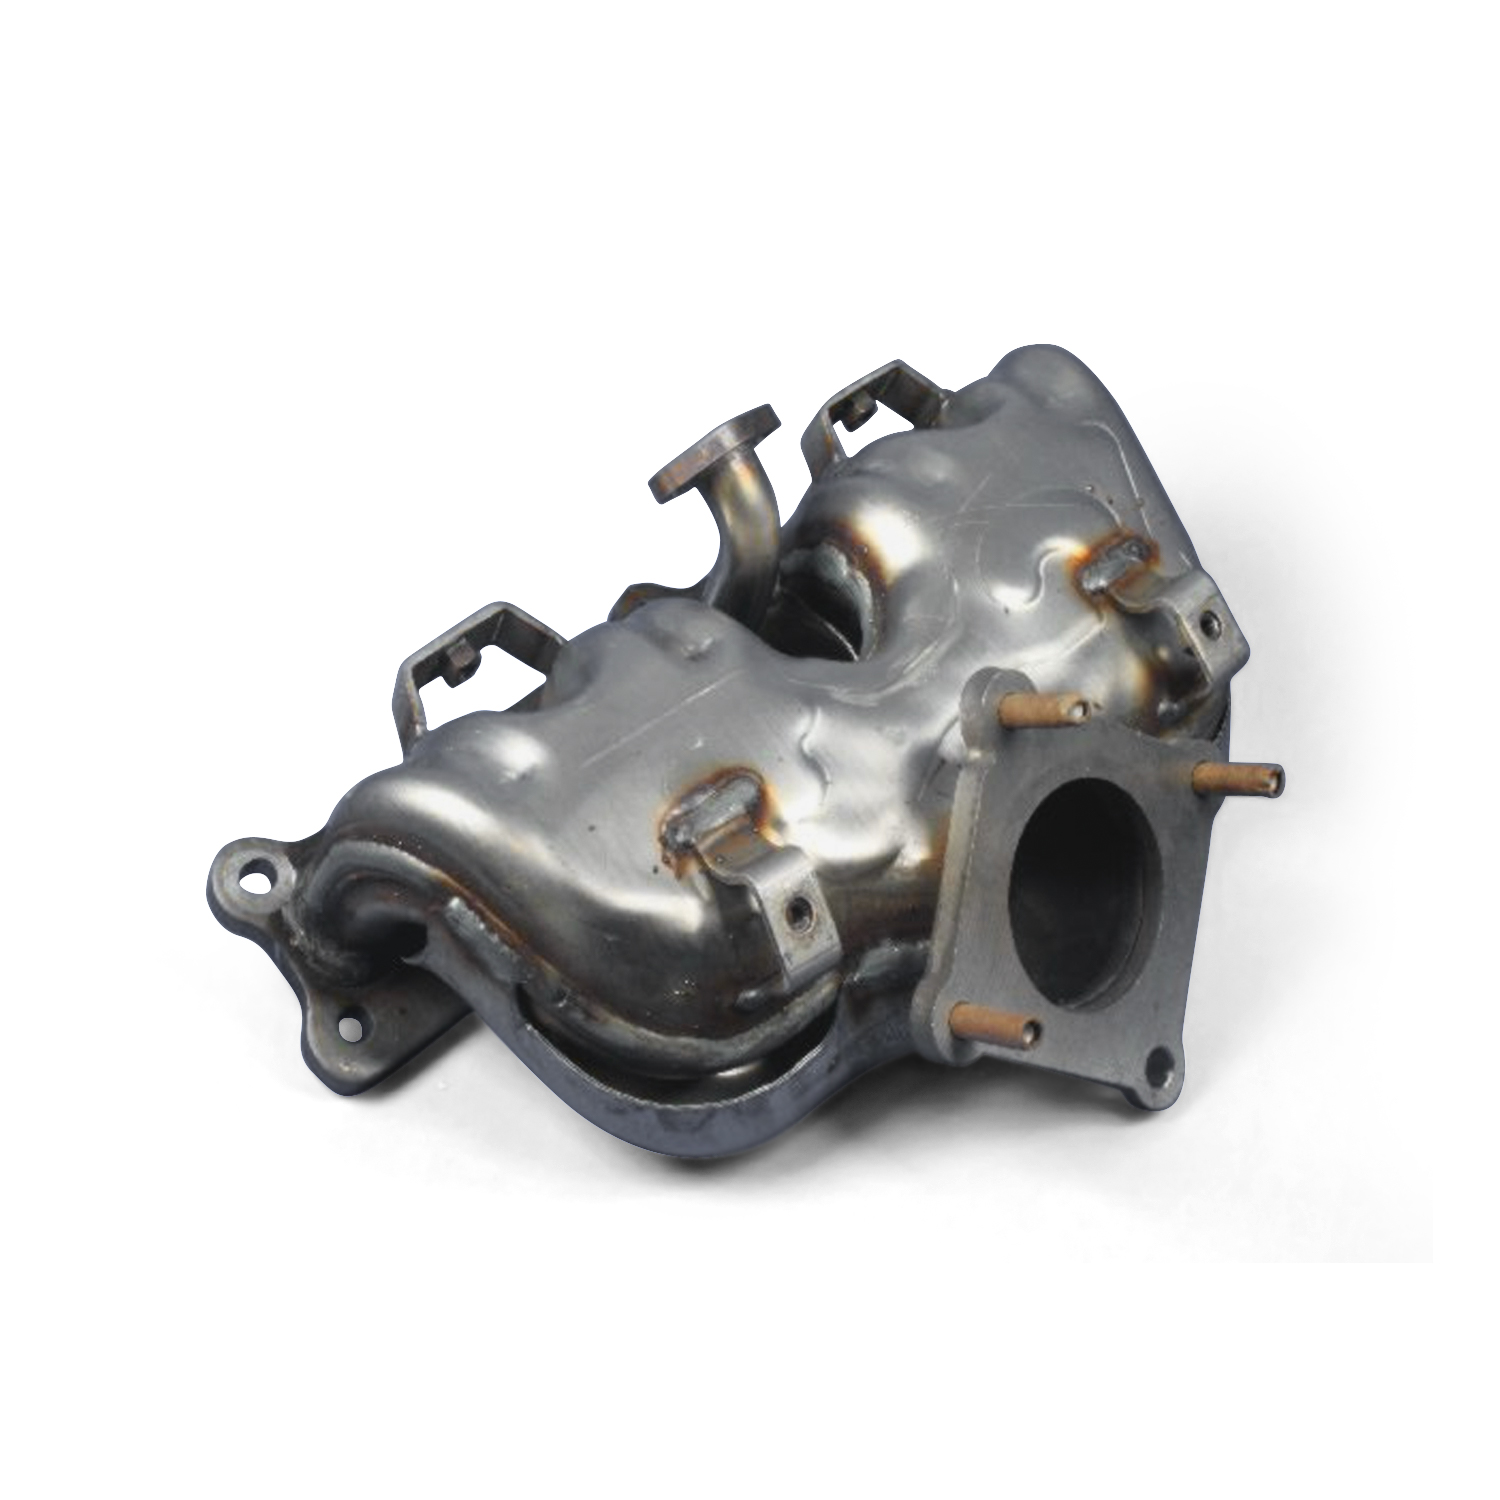 MOPAR BRAND - Exhaust Manifold with Integrated Catalytic Converter - MPB 04693342AD